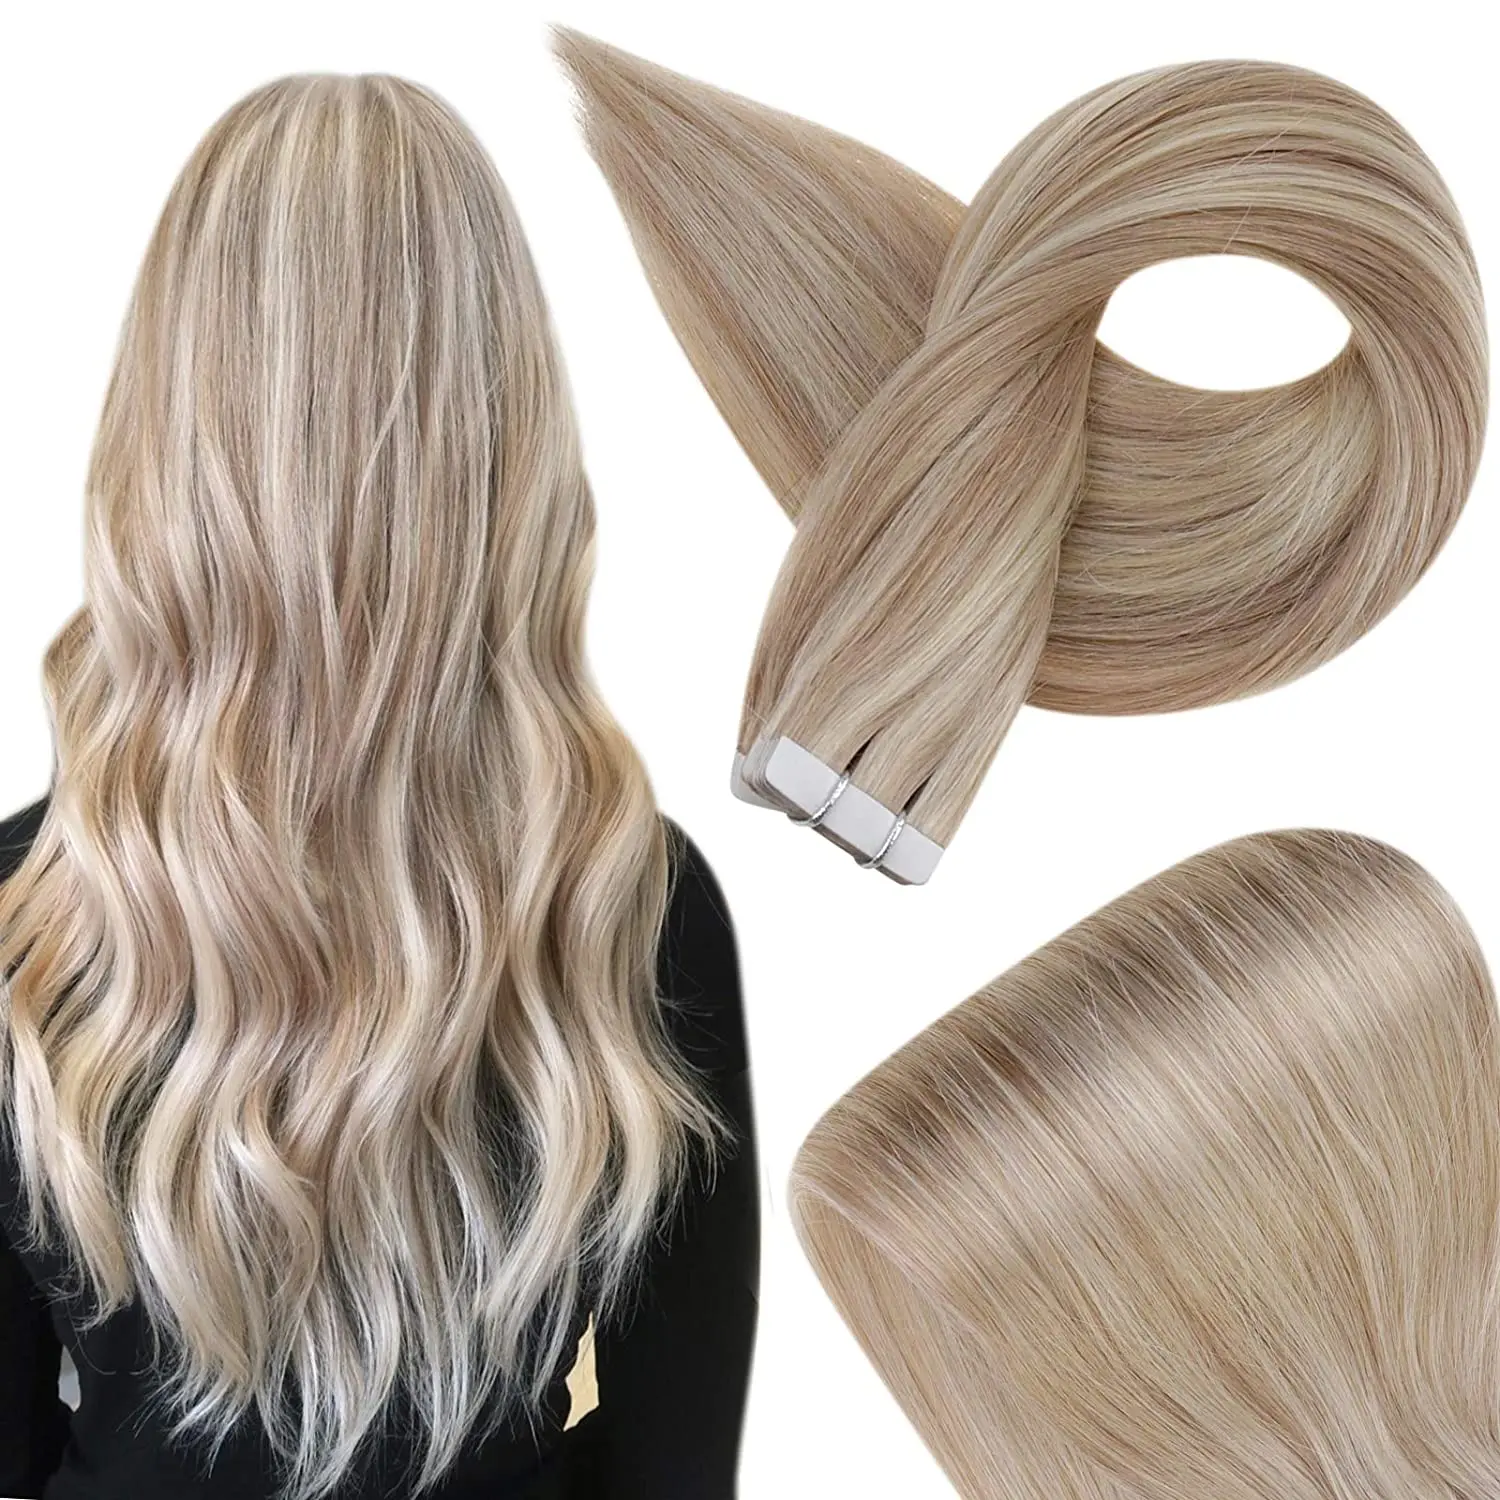 

Full Shine Hot Selling Highlight 613 Blonde Human Hair Extension Mix Dark Ash Blonde Remy Brazilian Hair Extensions Tape in 50G